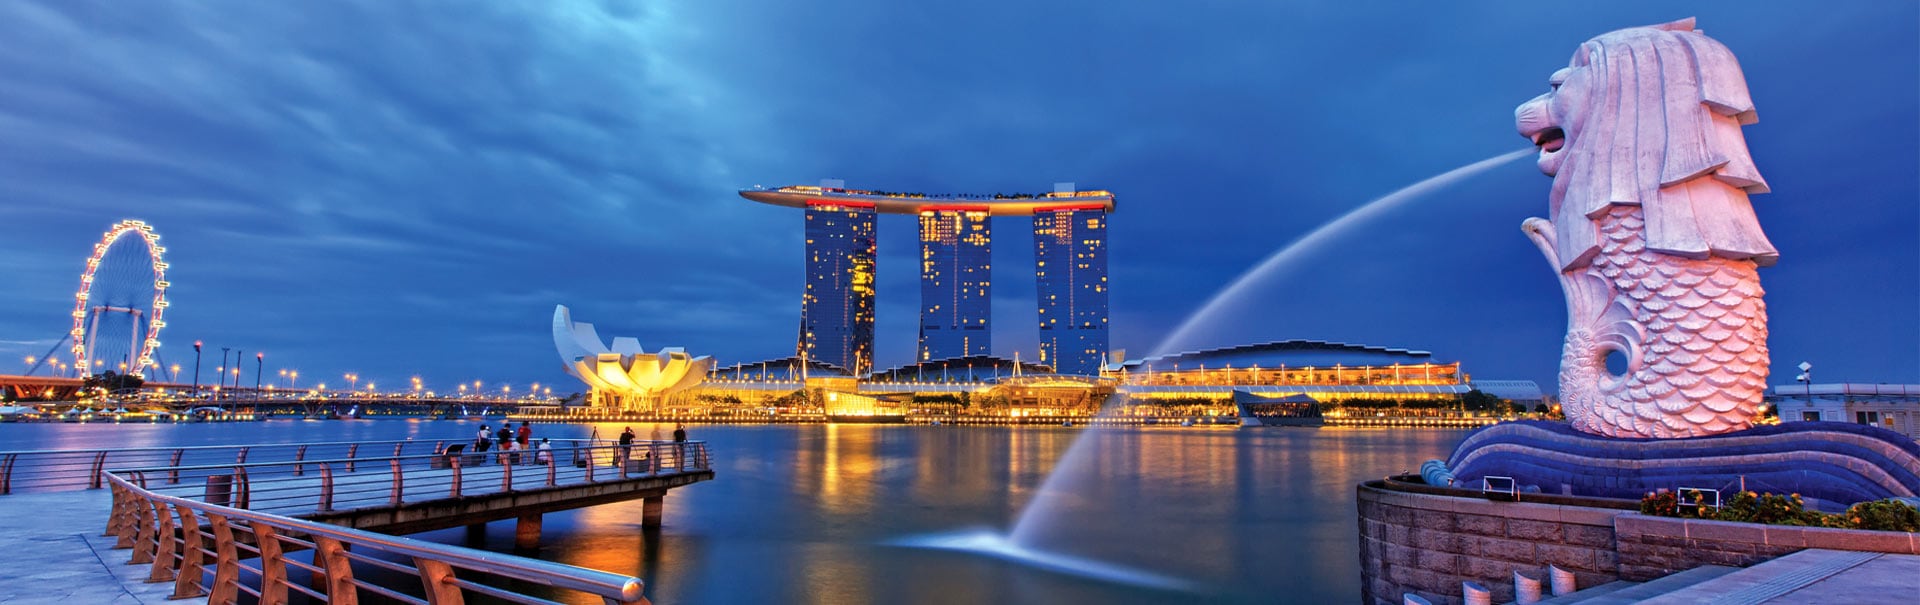 package tours singapore